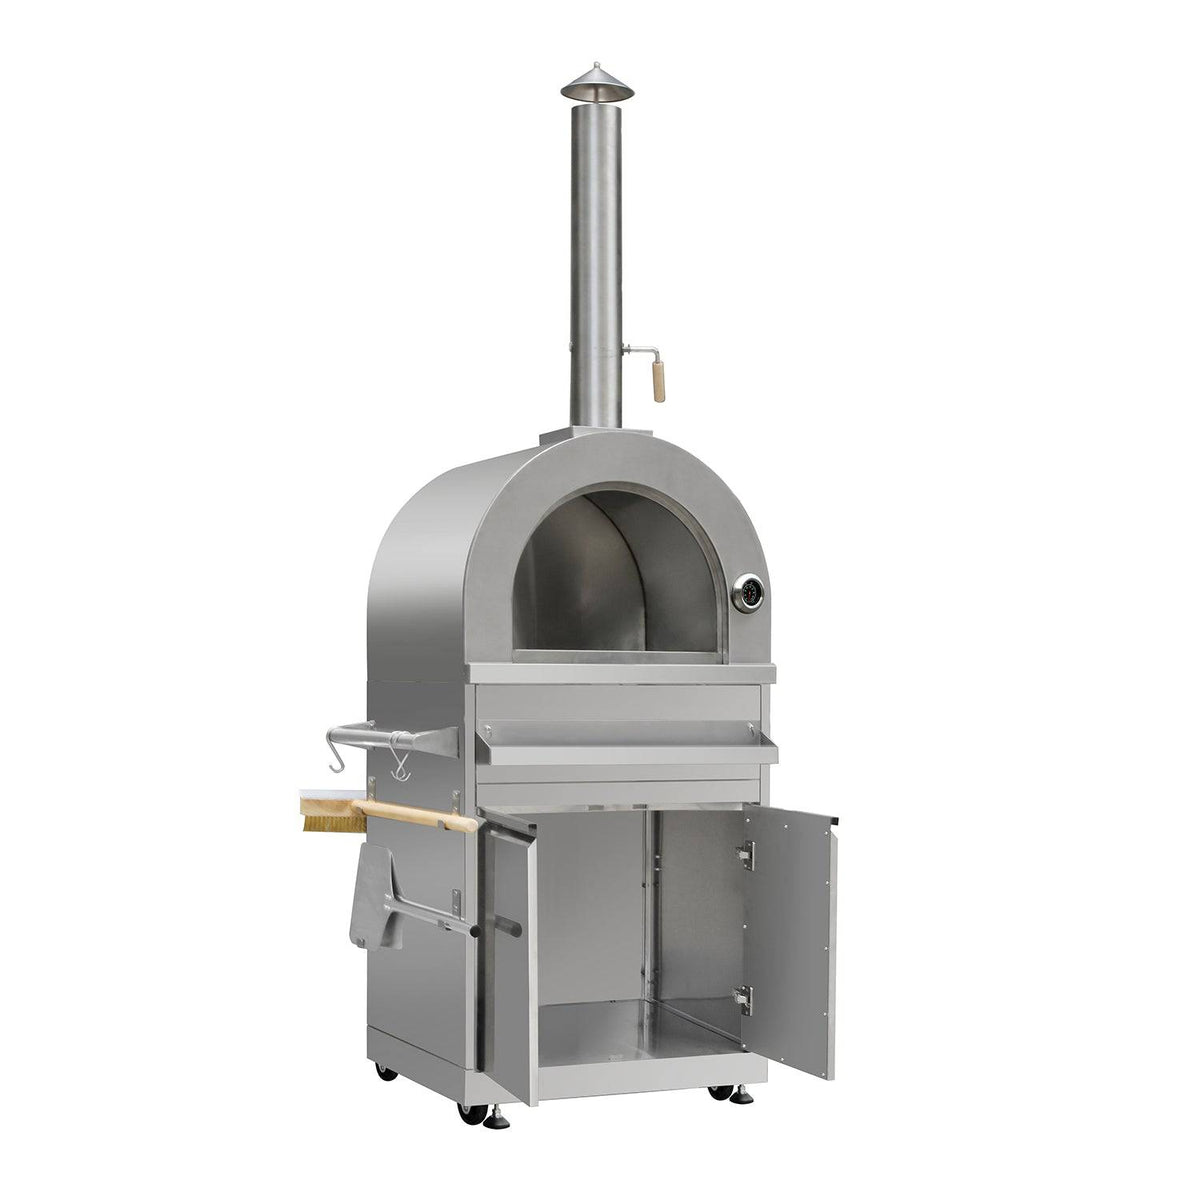 Fobest Stainless Steel Outdoor Wood Burning Pizza Oven with Cabinet - Pizza Oven-Fobest Appliance